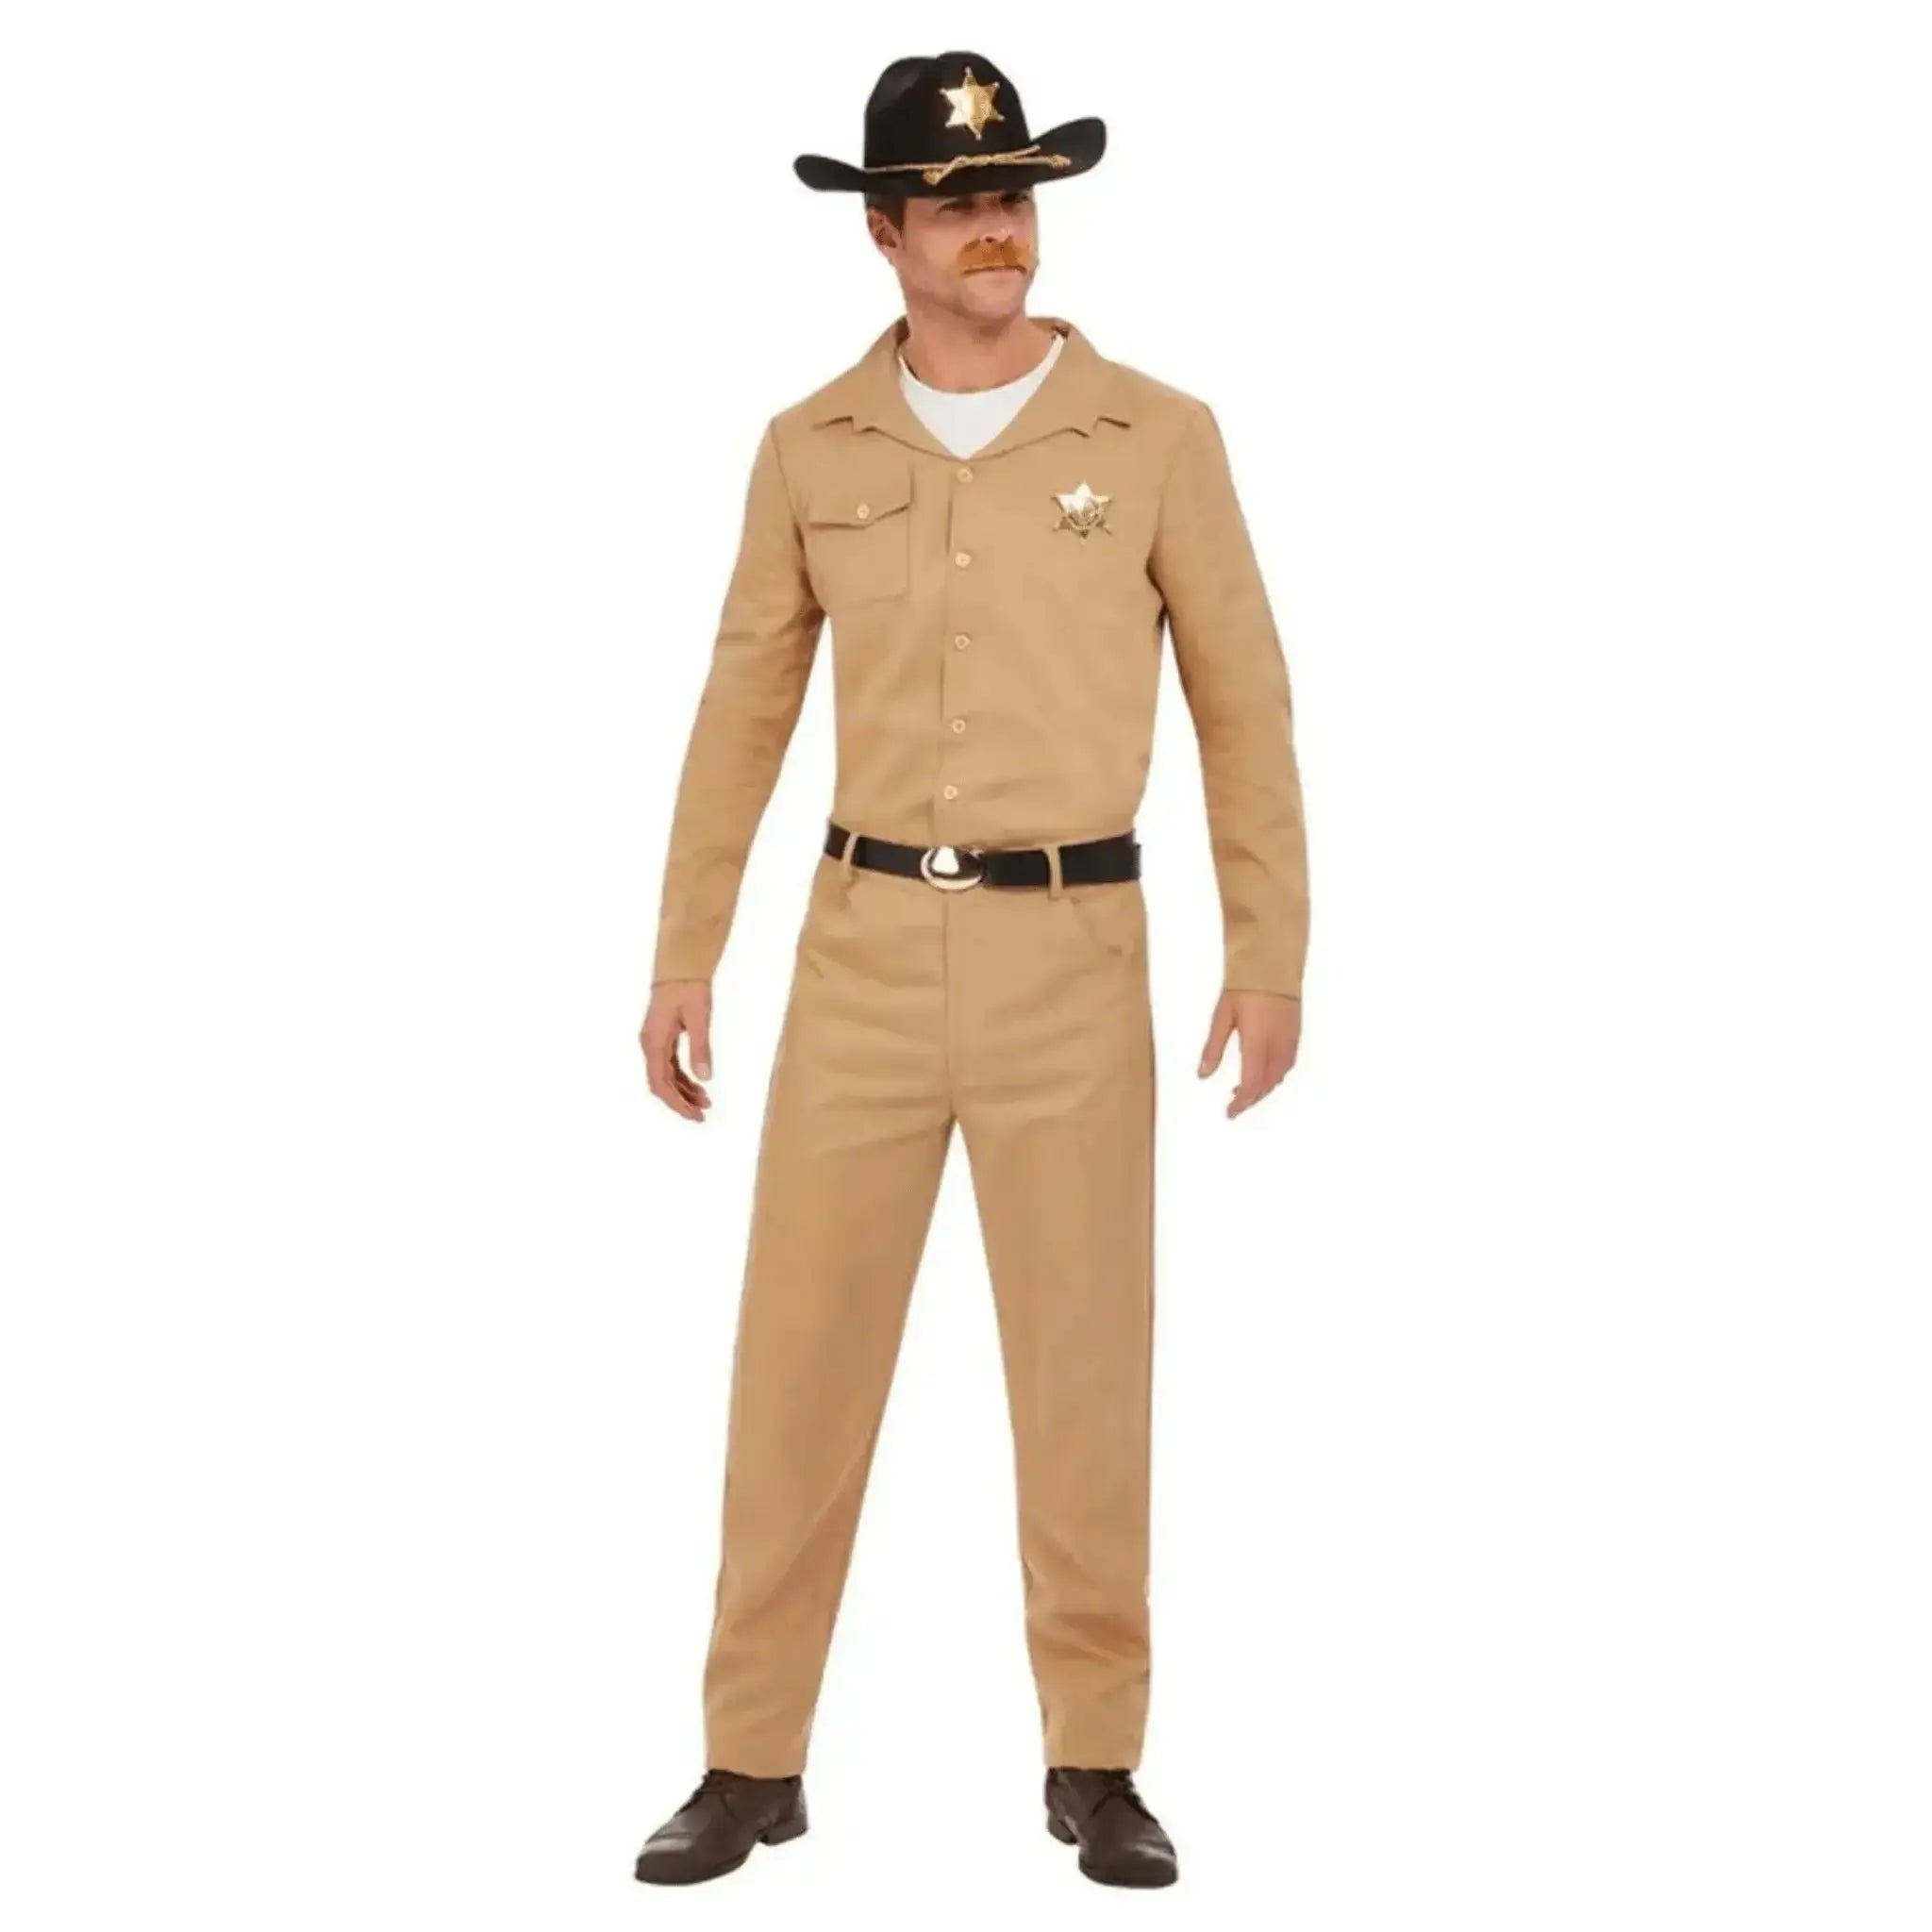 1980s Sheriff Costume | The Party Hut